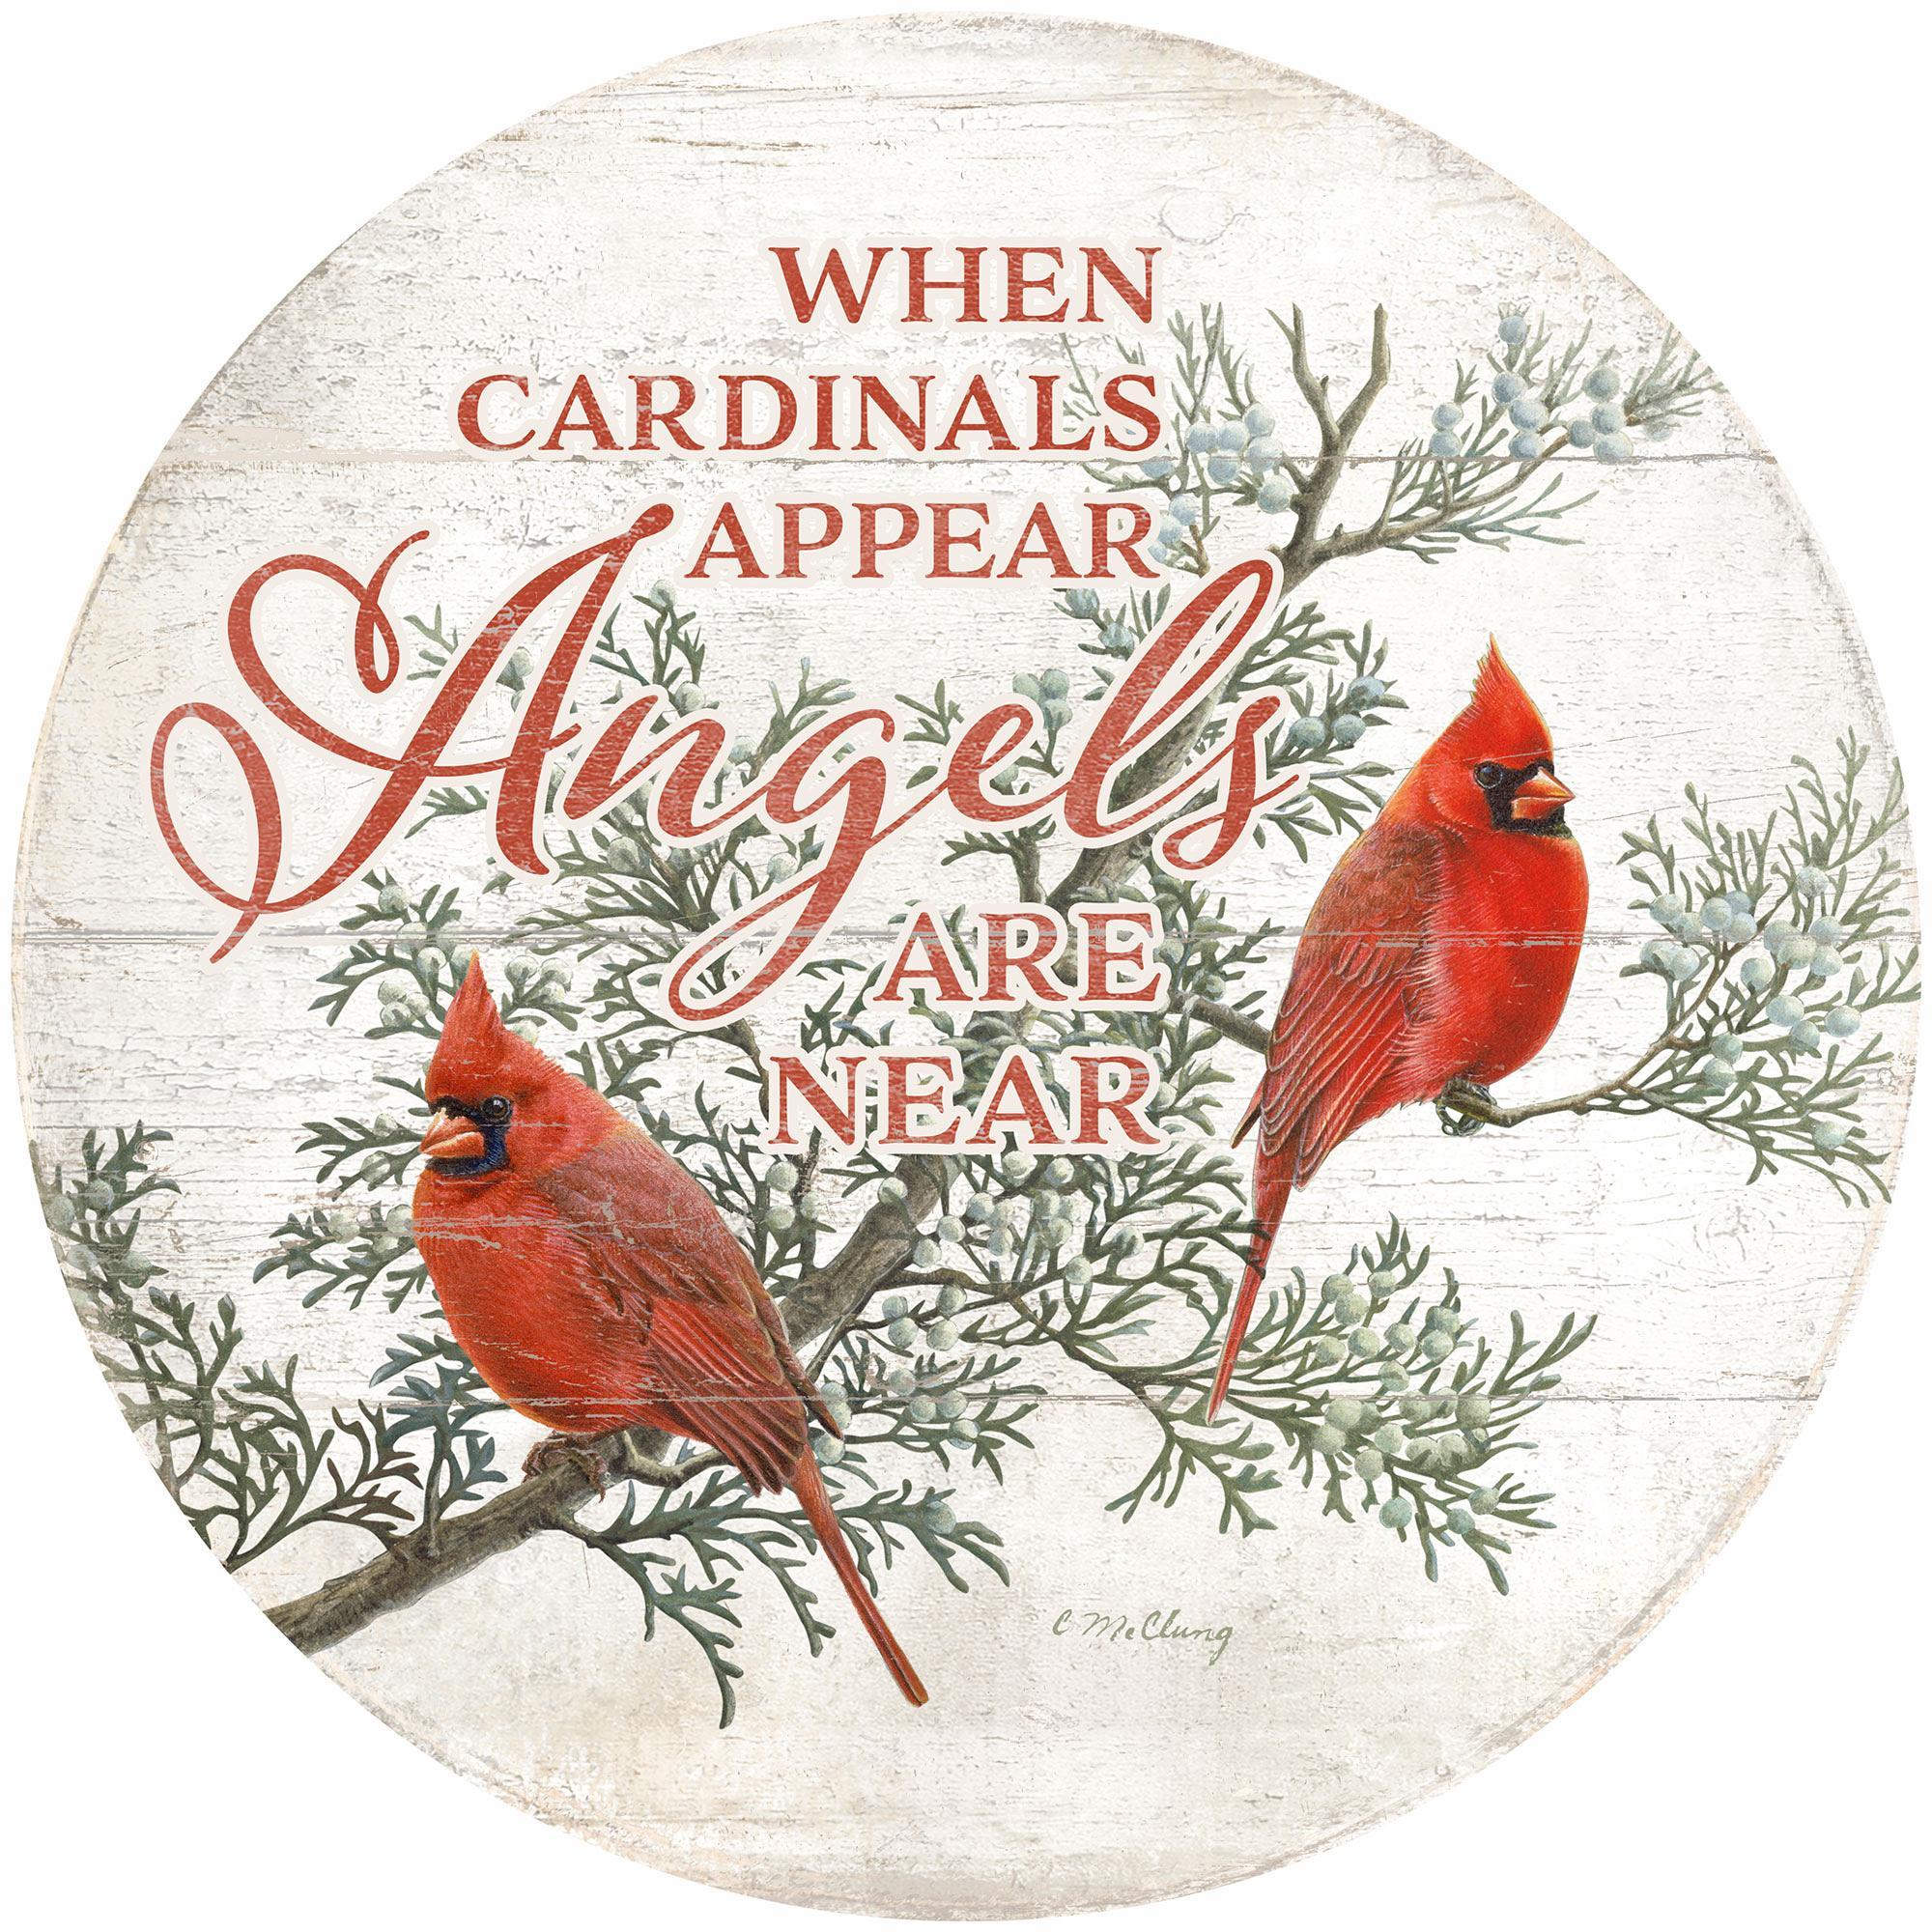 Angels are Near - Cardinals 12" Round Wood Sign - Wild Wings